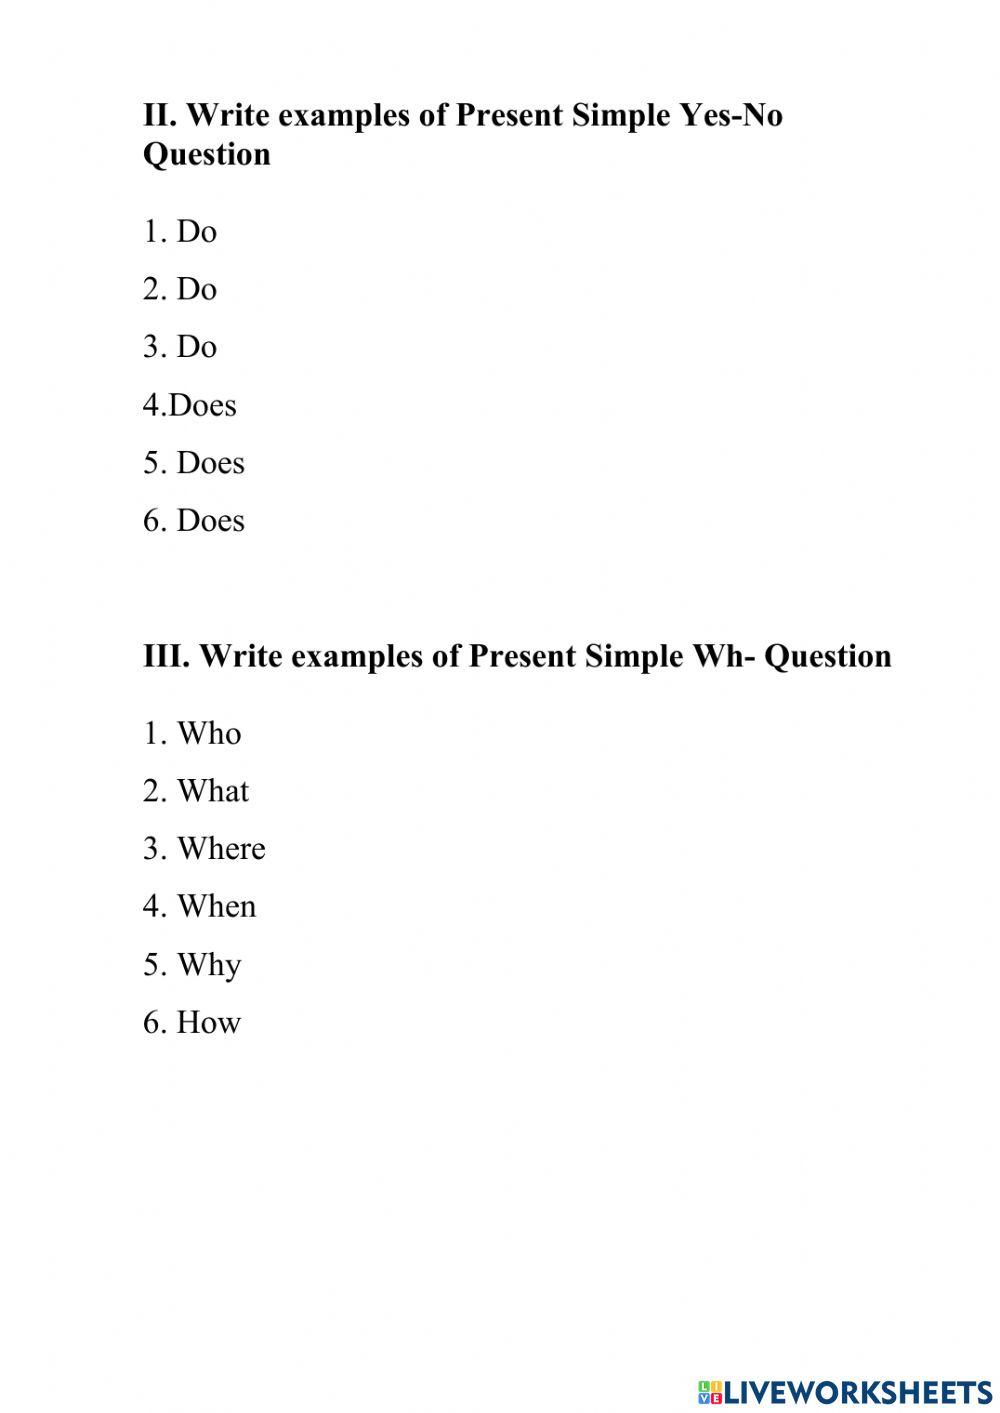 Adverbs of Frequency, Present Simple Questions